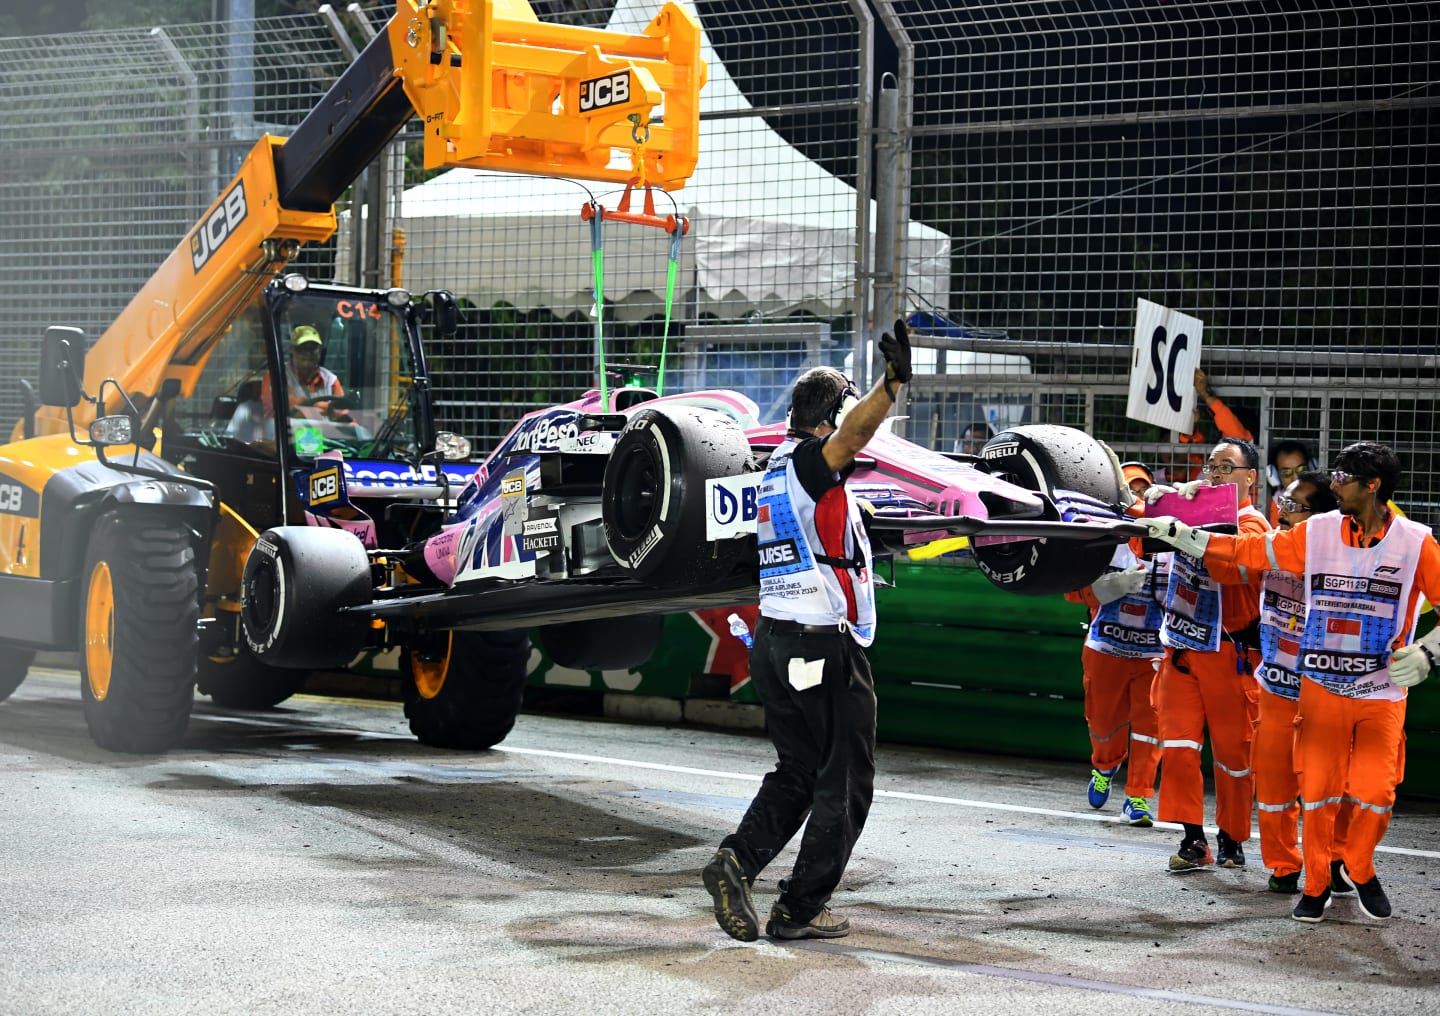 SINGAPORE, SINGAPORE - SEPTEMBER 22: The car of Sergio Perez of Mexico and Racing Point is removed